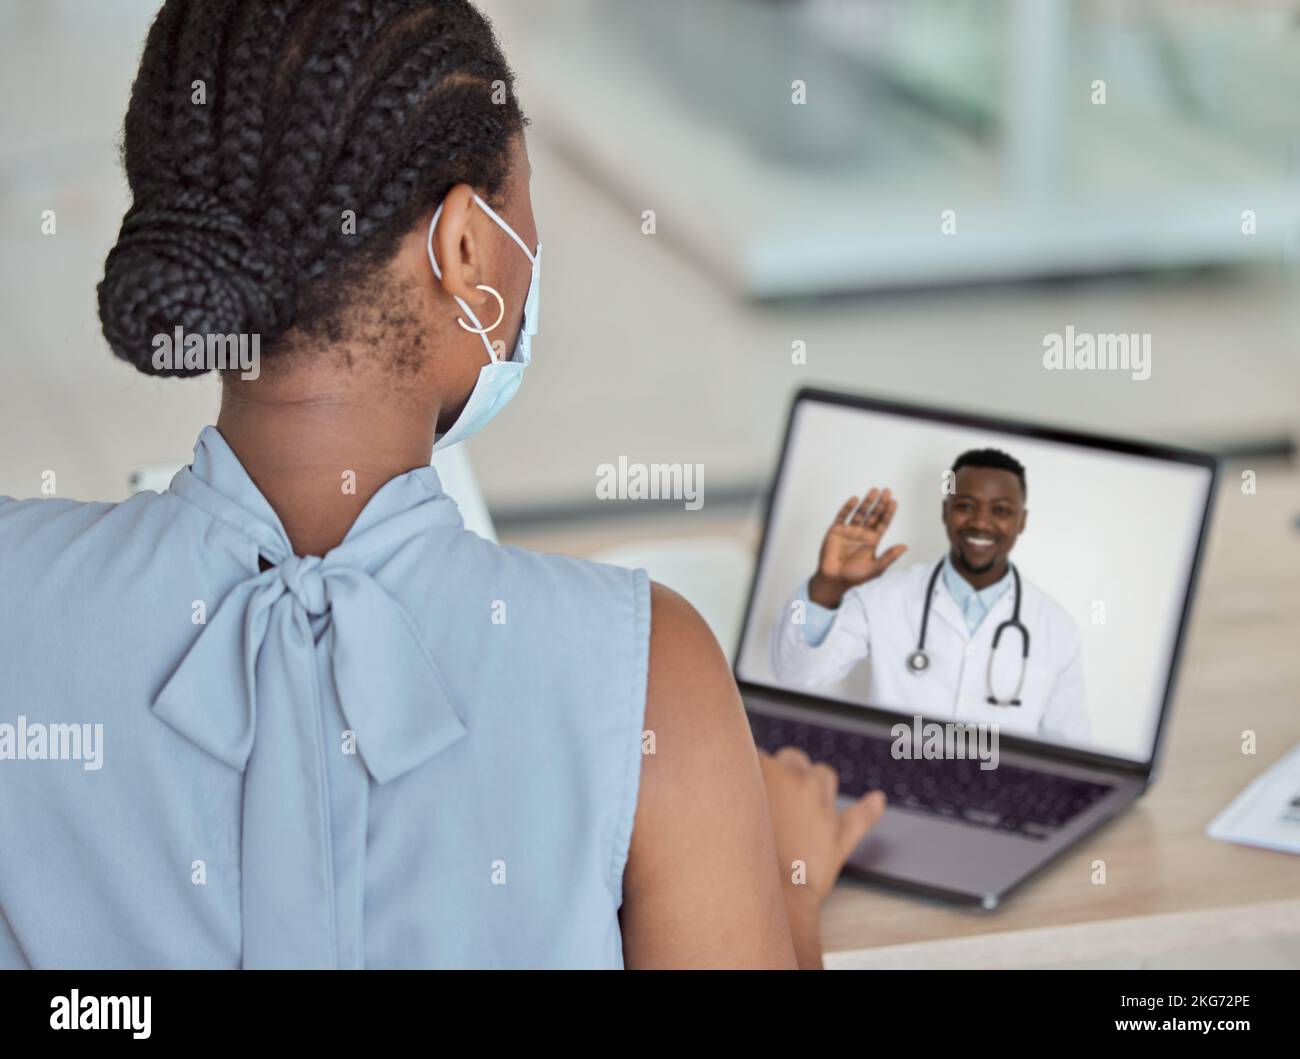 Covid, laptop and remote consultant with a doctor black man on a computer screen talking to a patient. Meeting, health and medicine with a woman on a Stock Photo